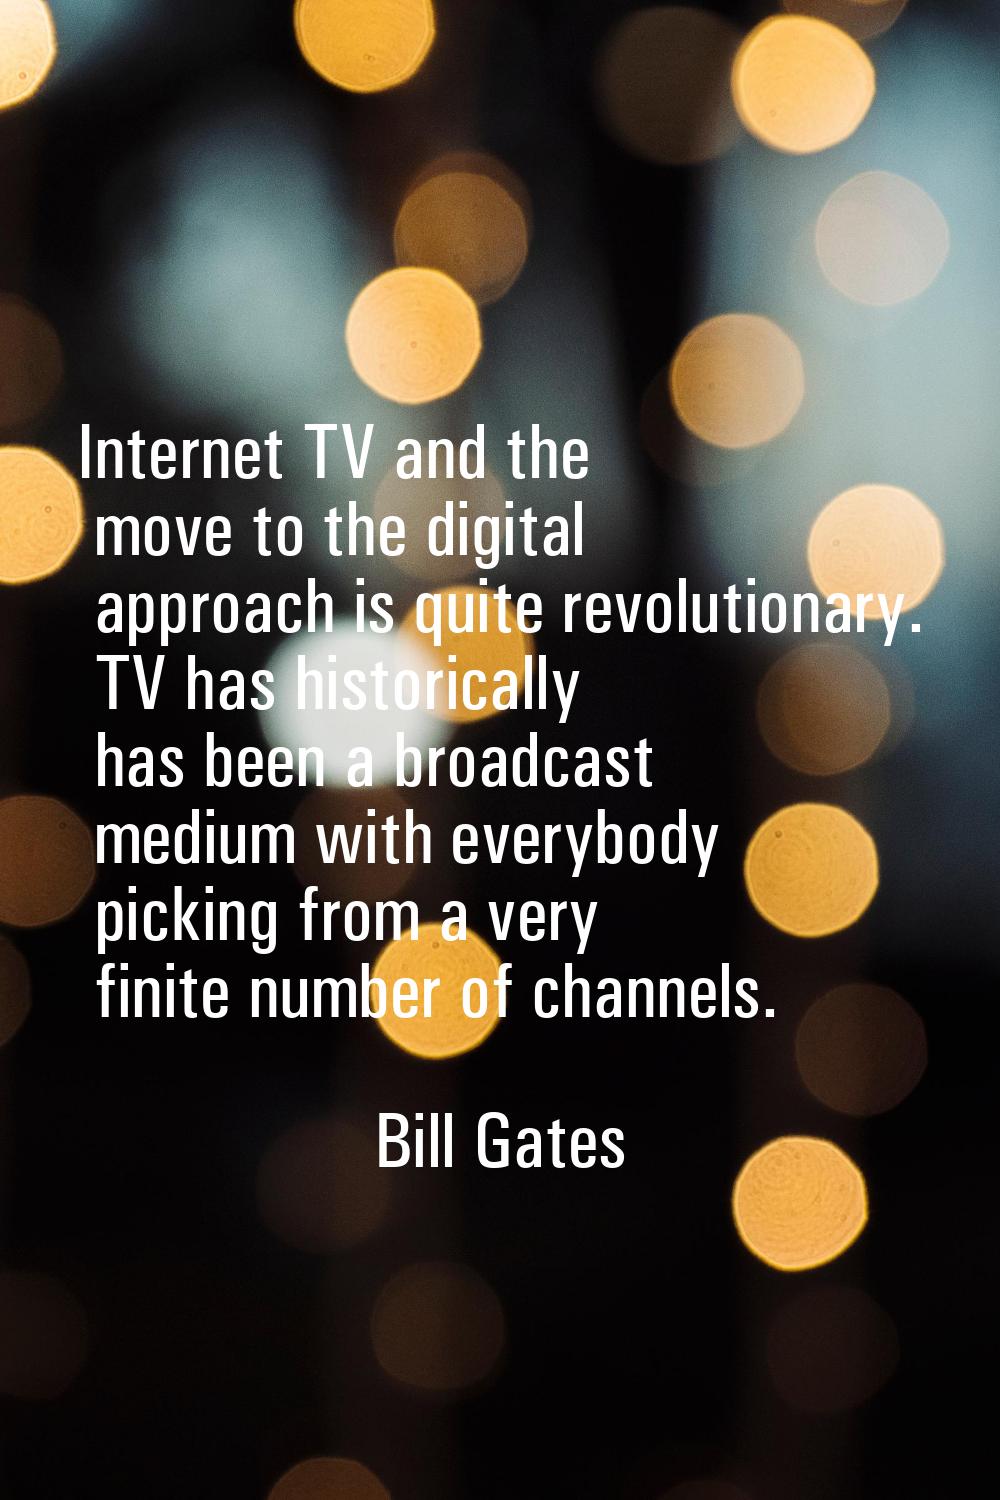 Internet TV and the move to the digital approach is quite revolutionary. TV has historically has be